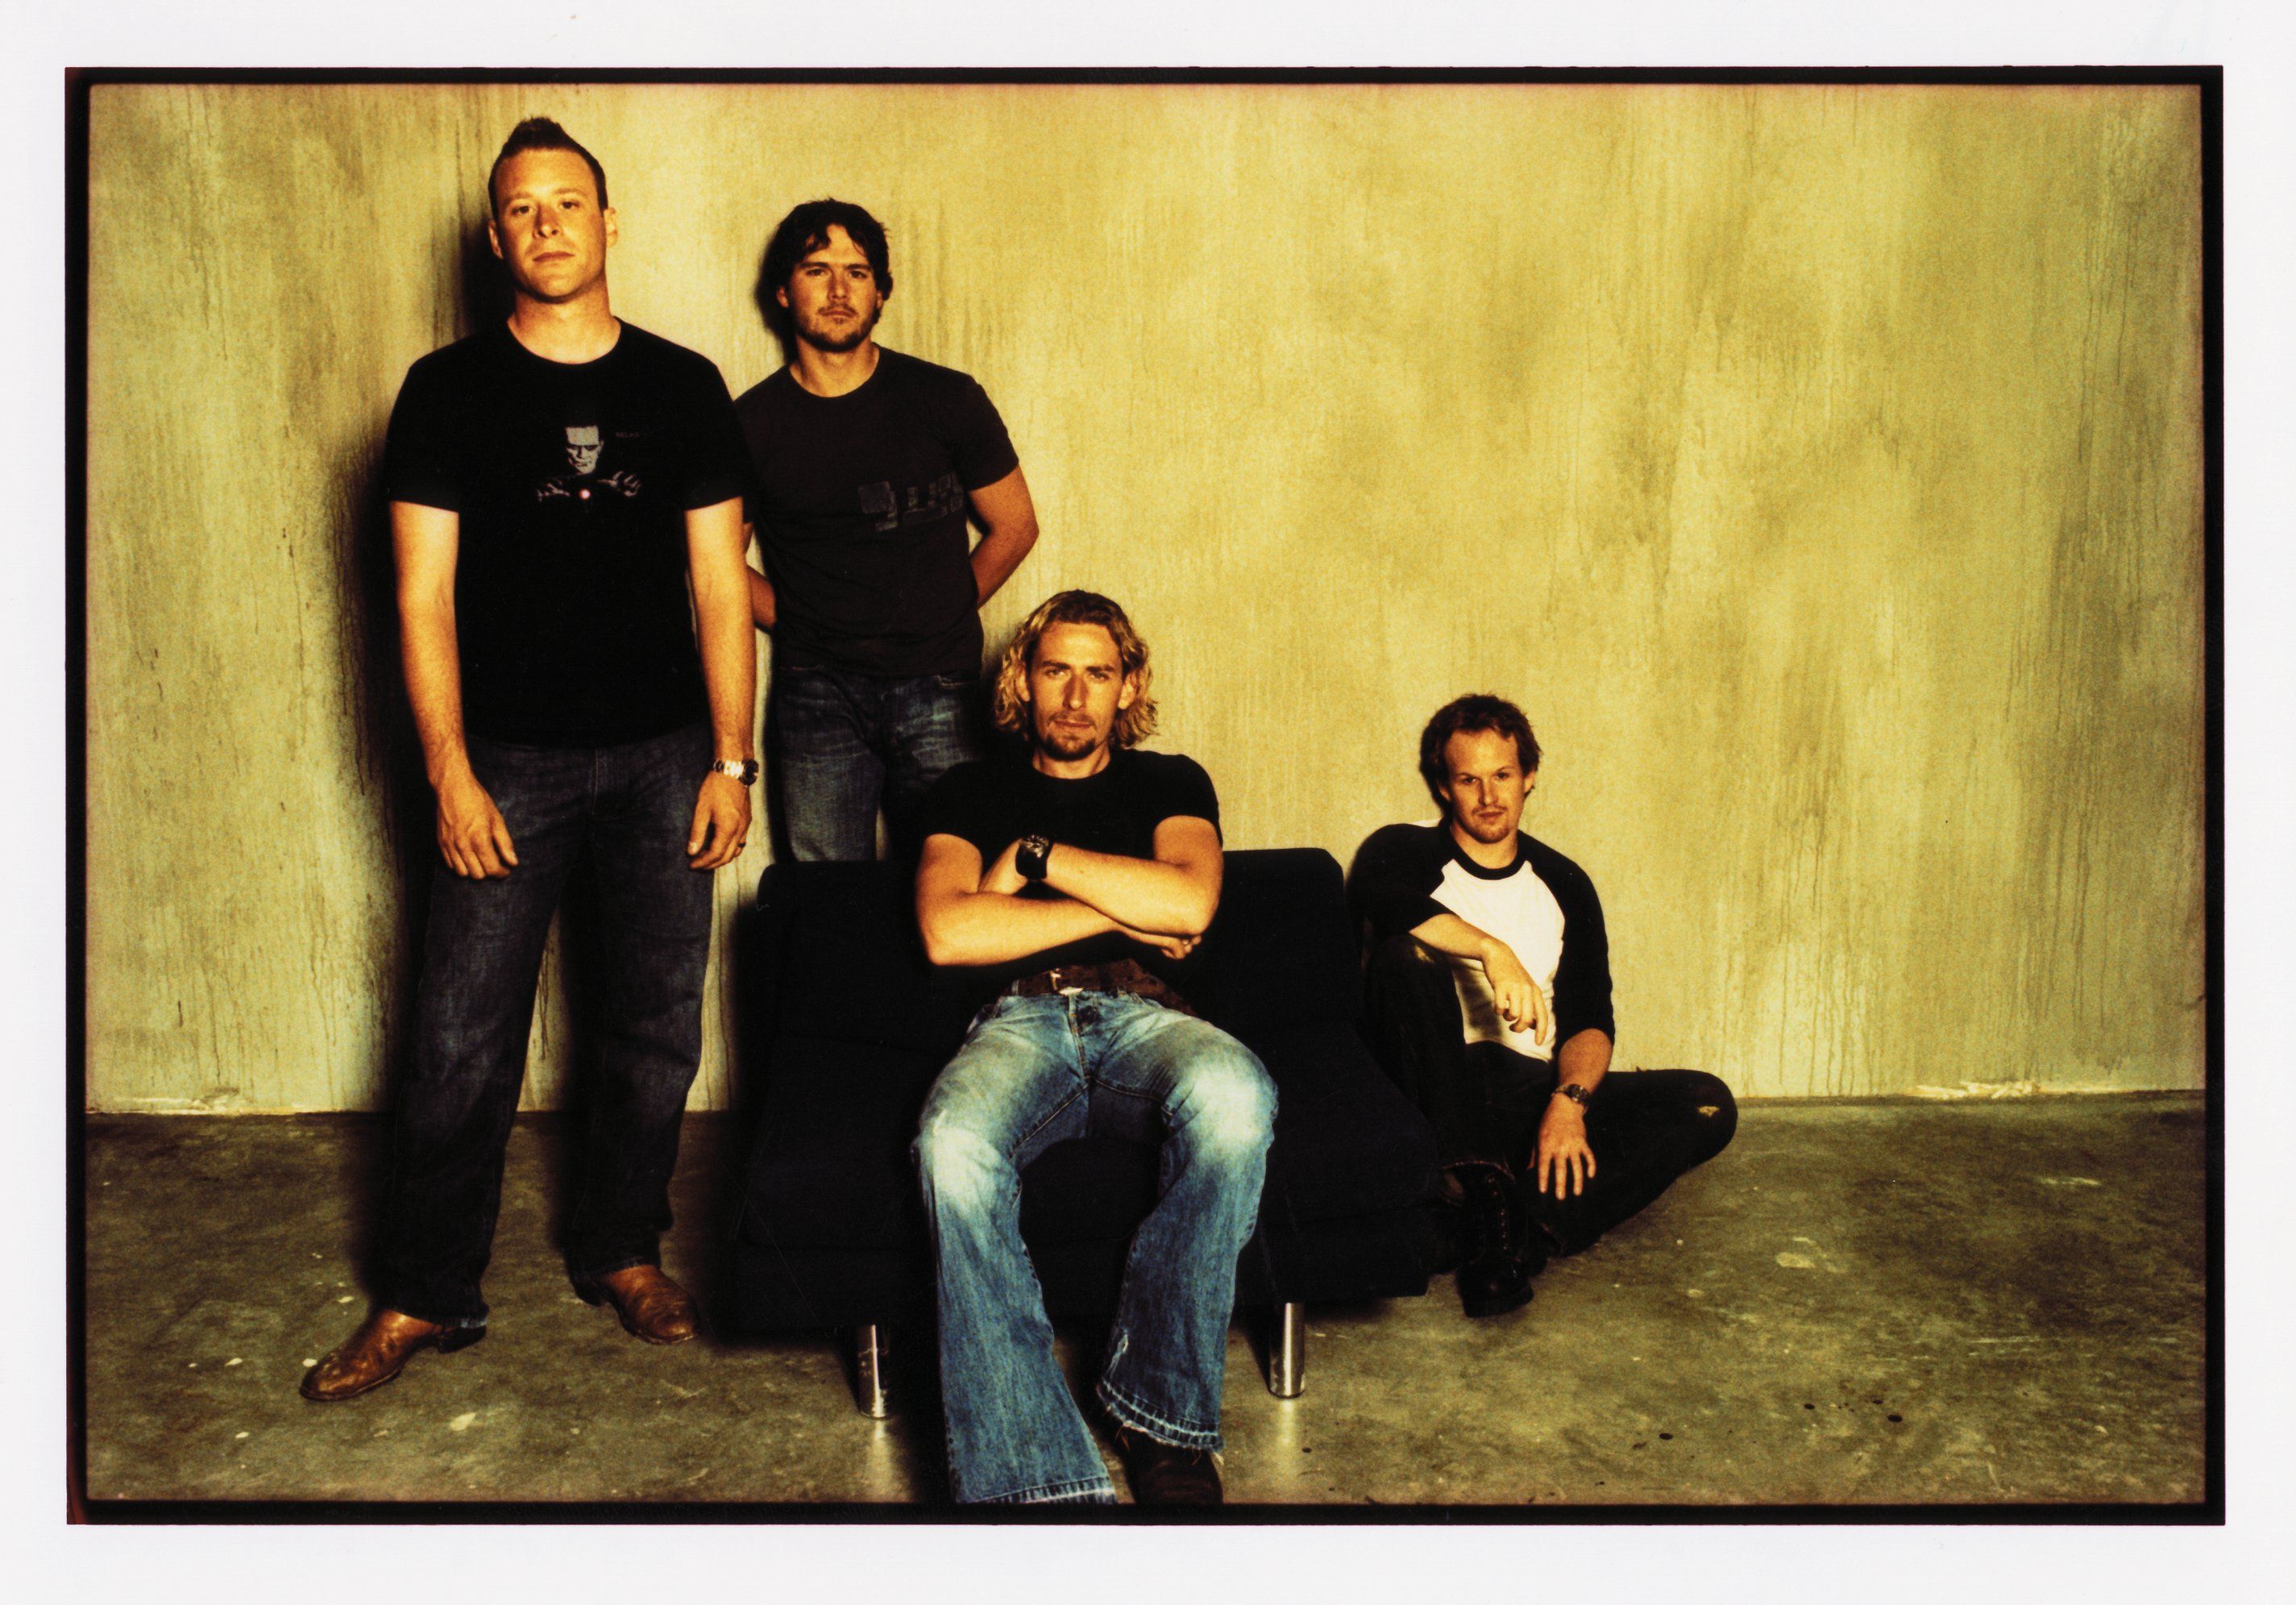 Nickelback photoshot wallpapers and images - wallpapers, pictures ...